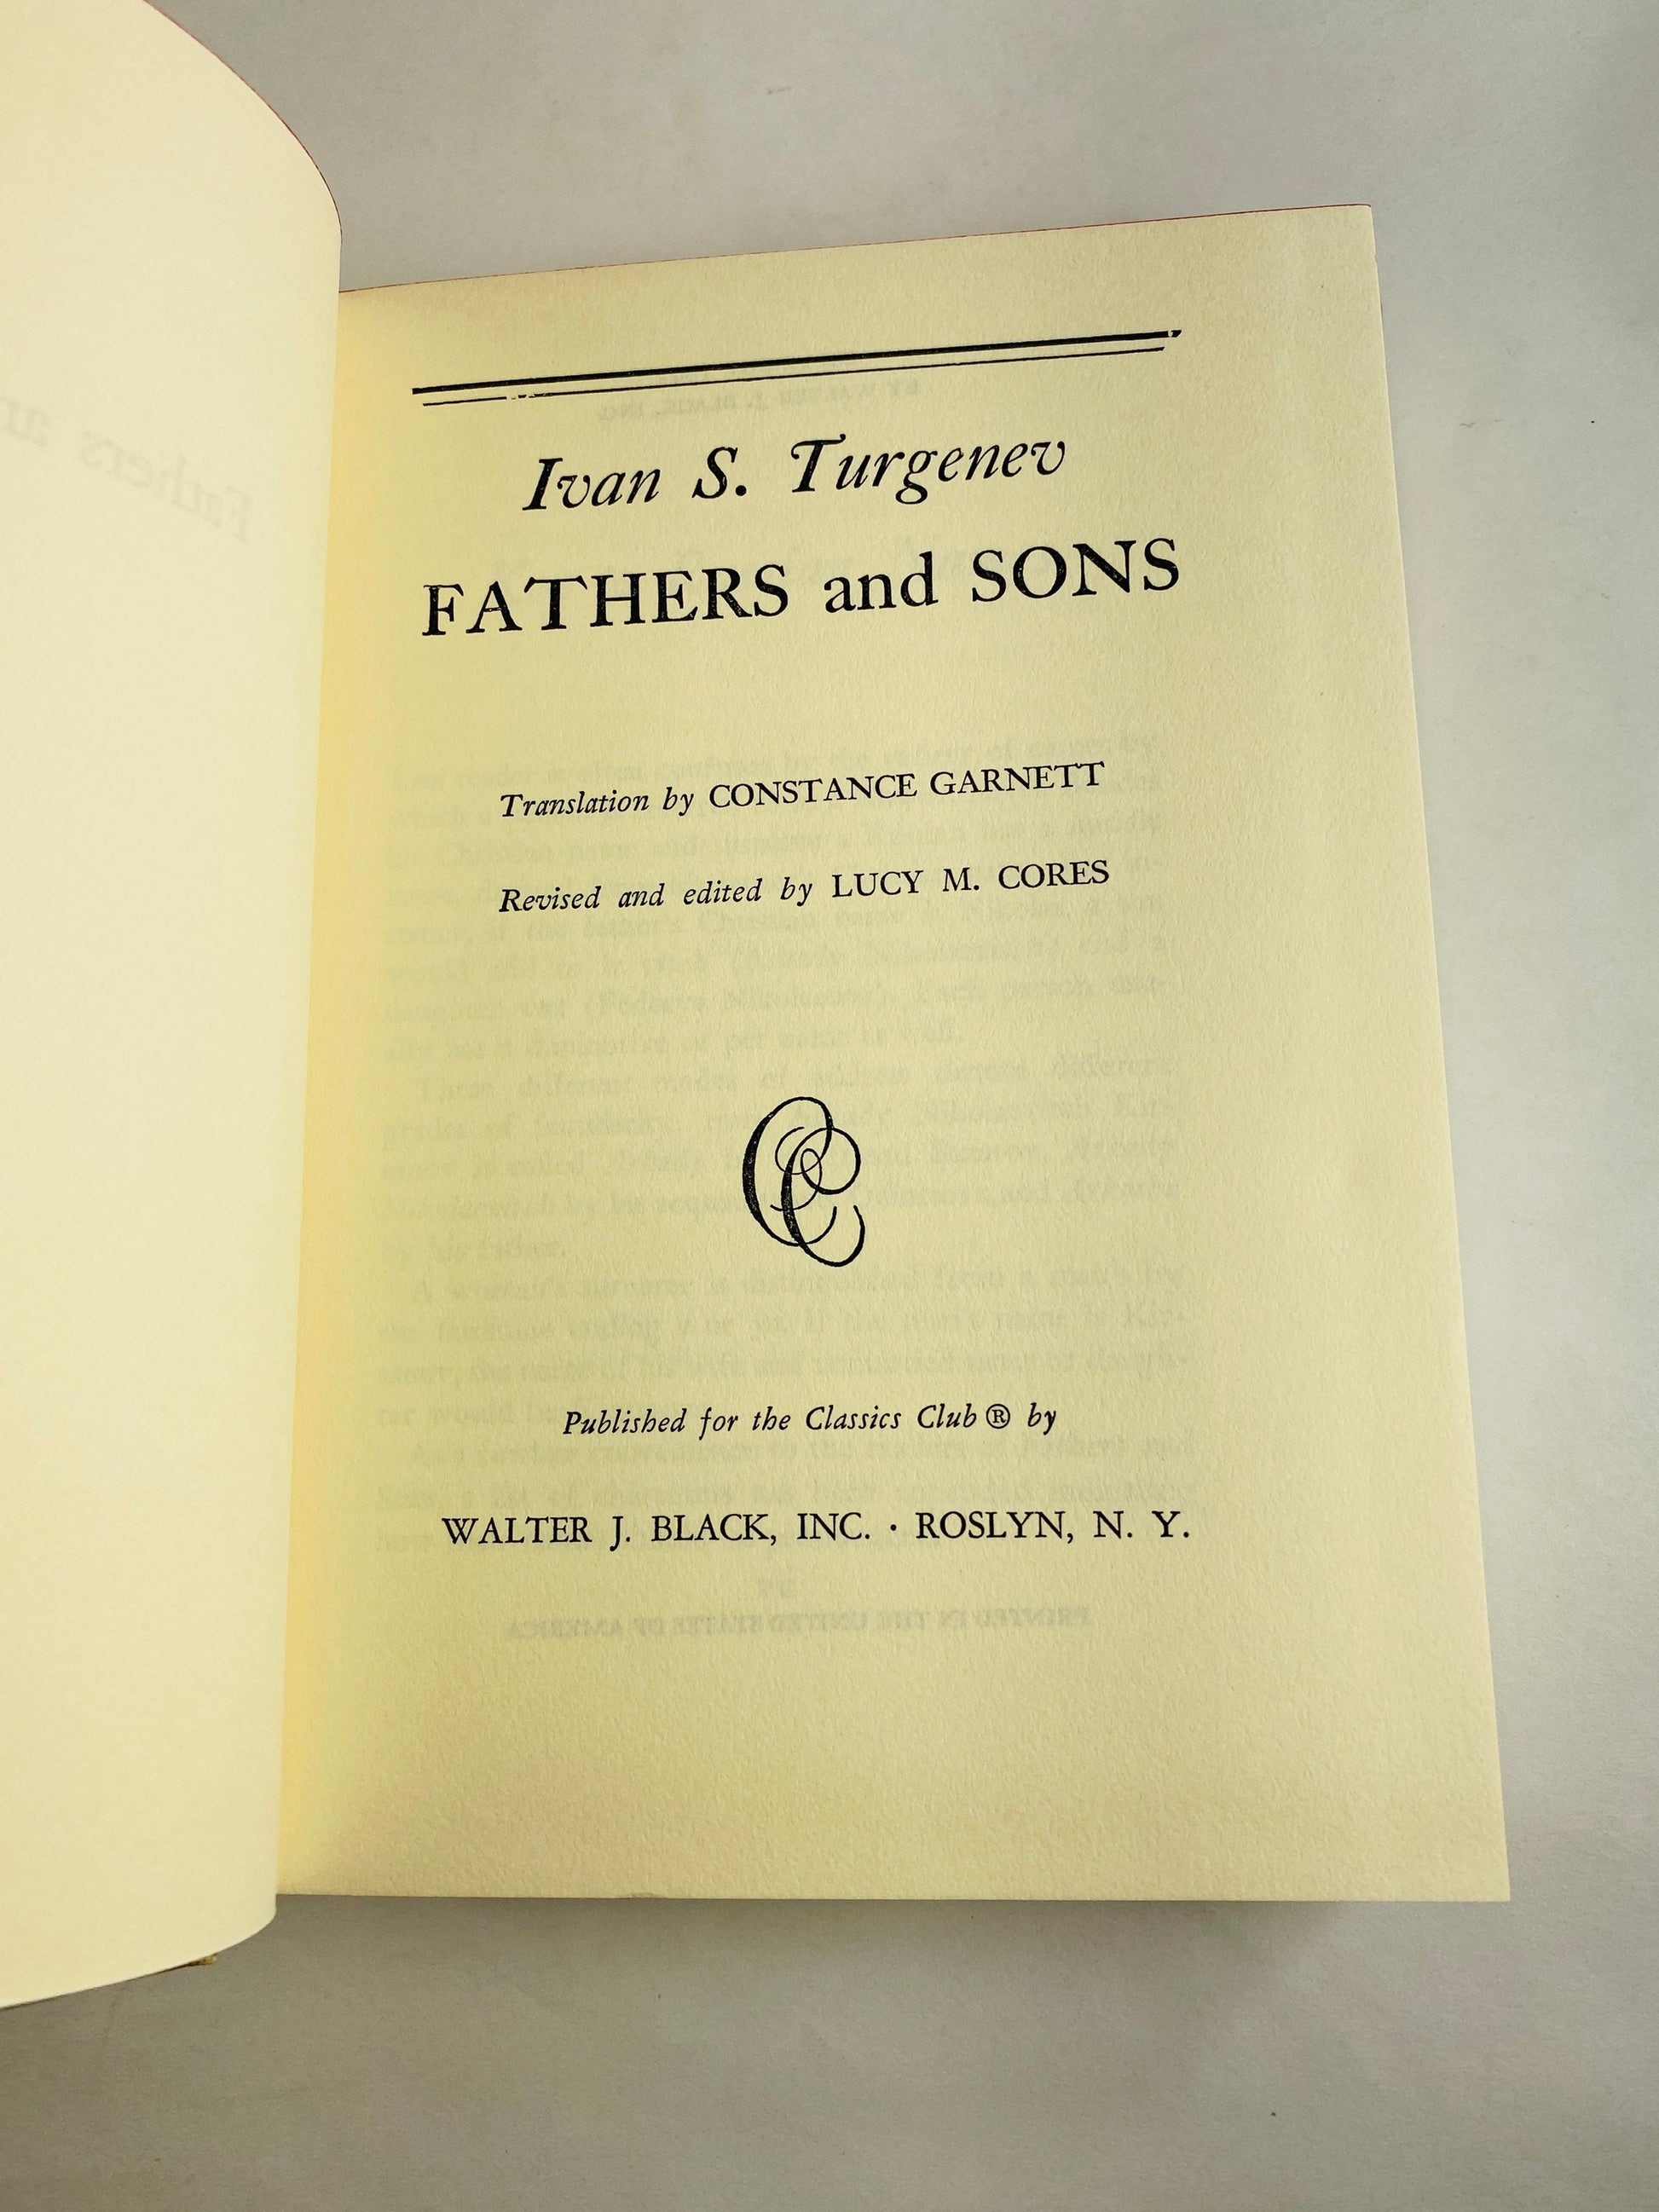 Fathers and Sons by Ivan Turgenev Vintage book circa 1942 beige cloth binding w/ gold trim.